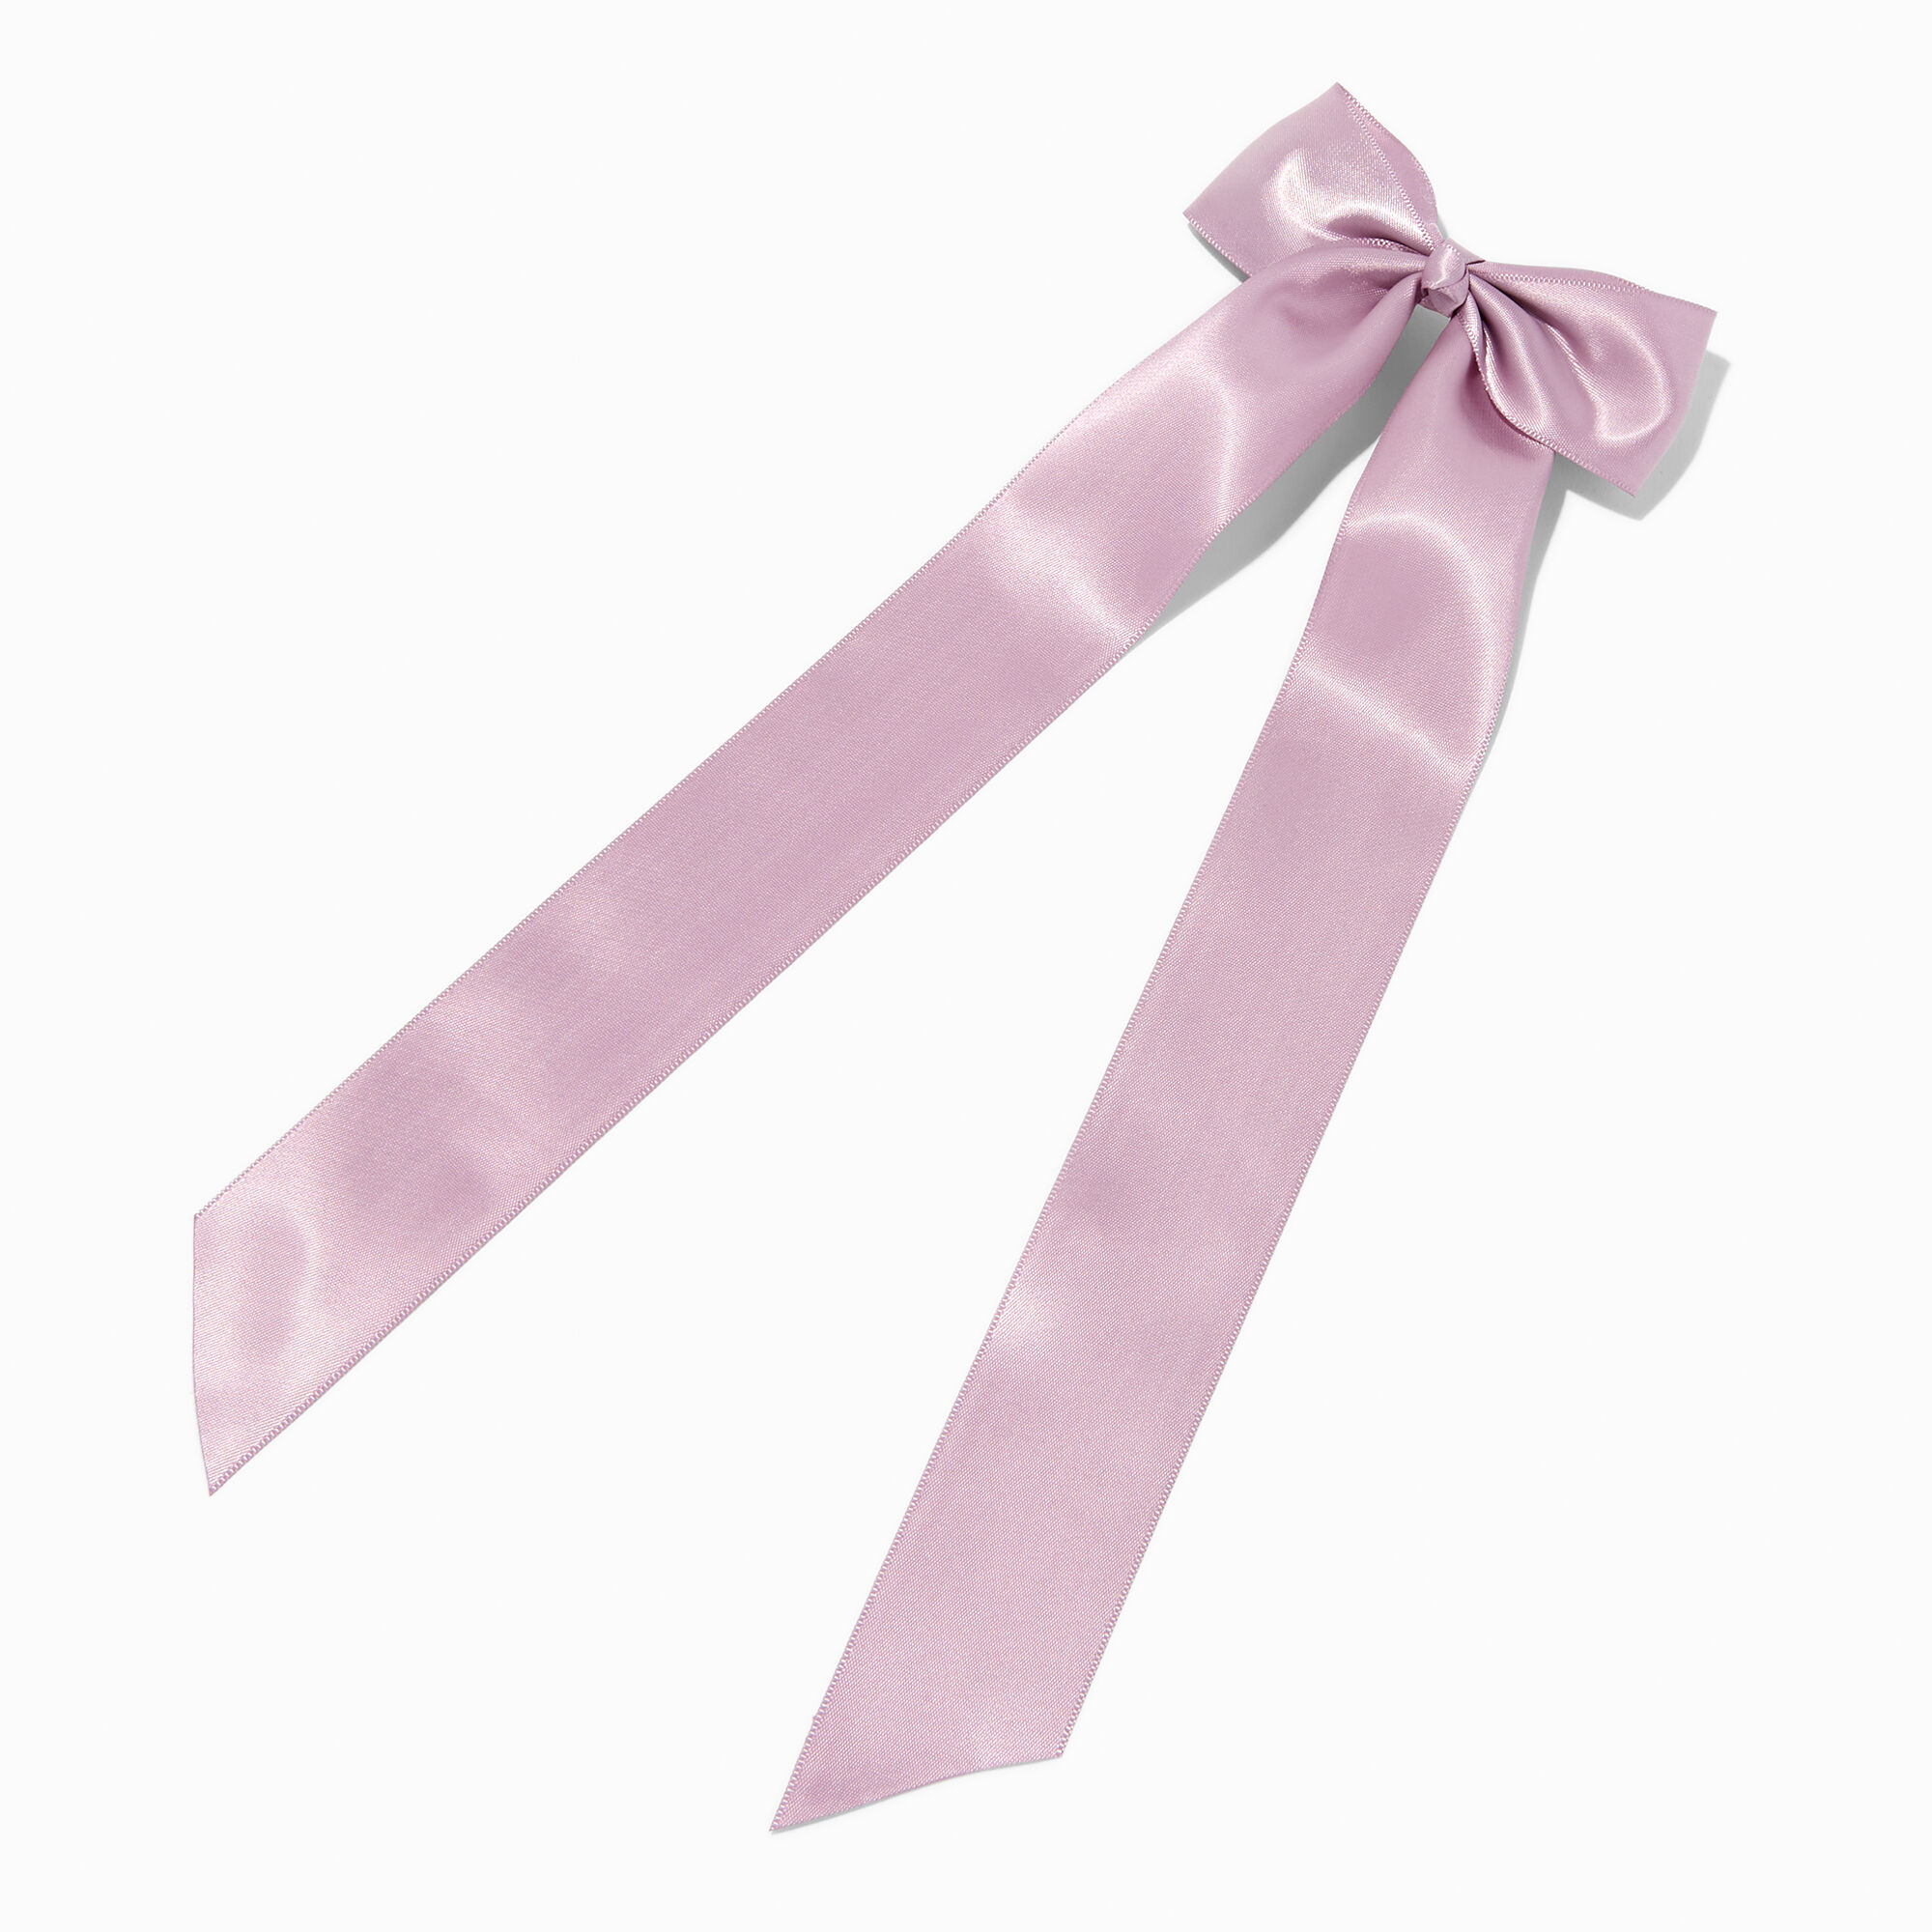 View Claires Lavender Satin Long Tail Bow Hair Clip information